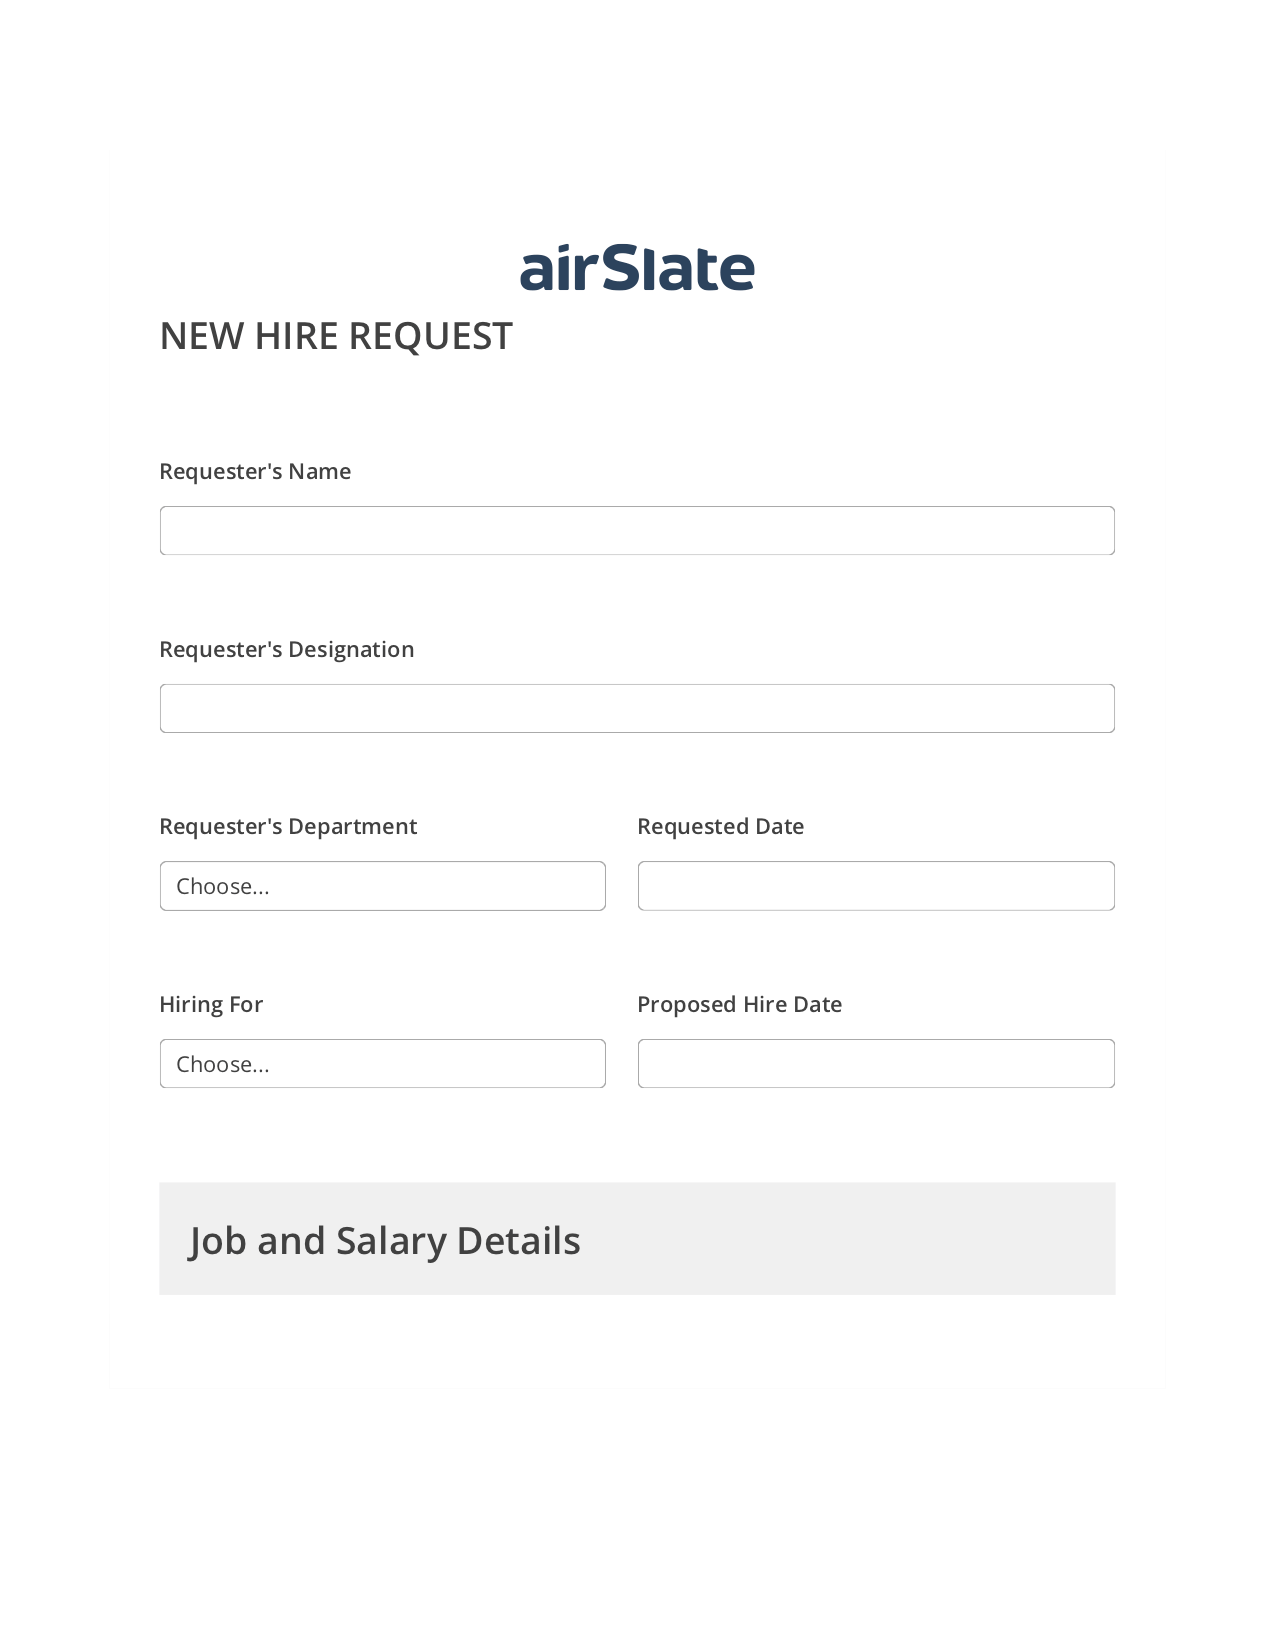 Hiring Request Flow Pre-fill from Salesforce Records with SOQL Bot